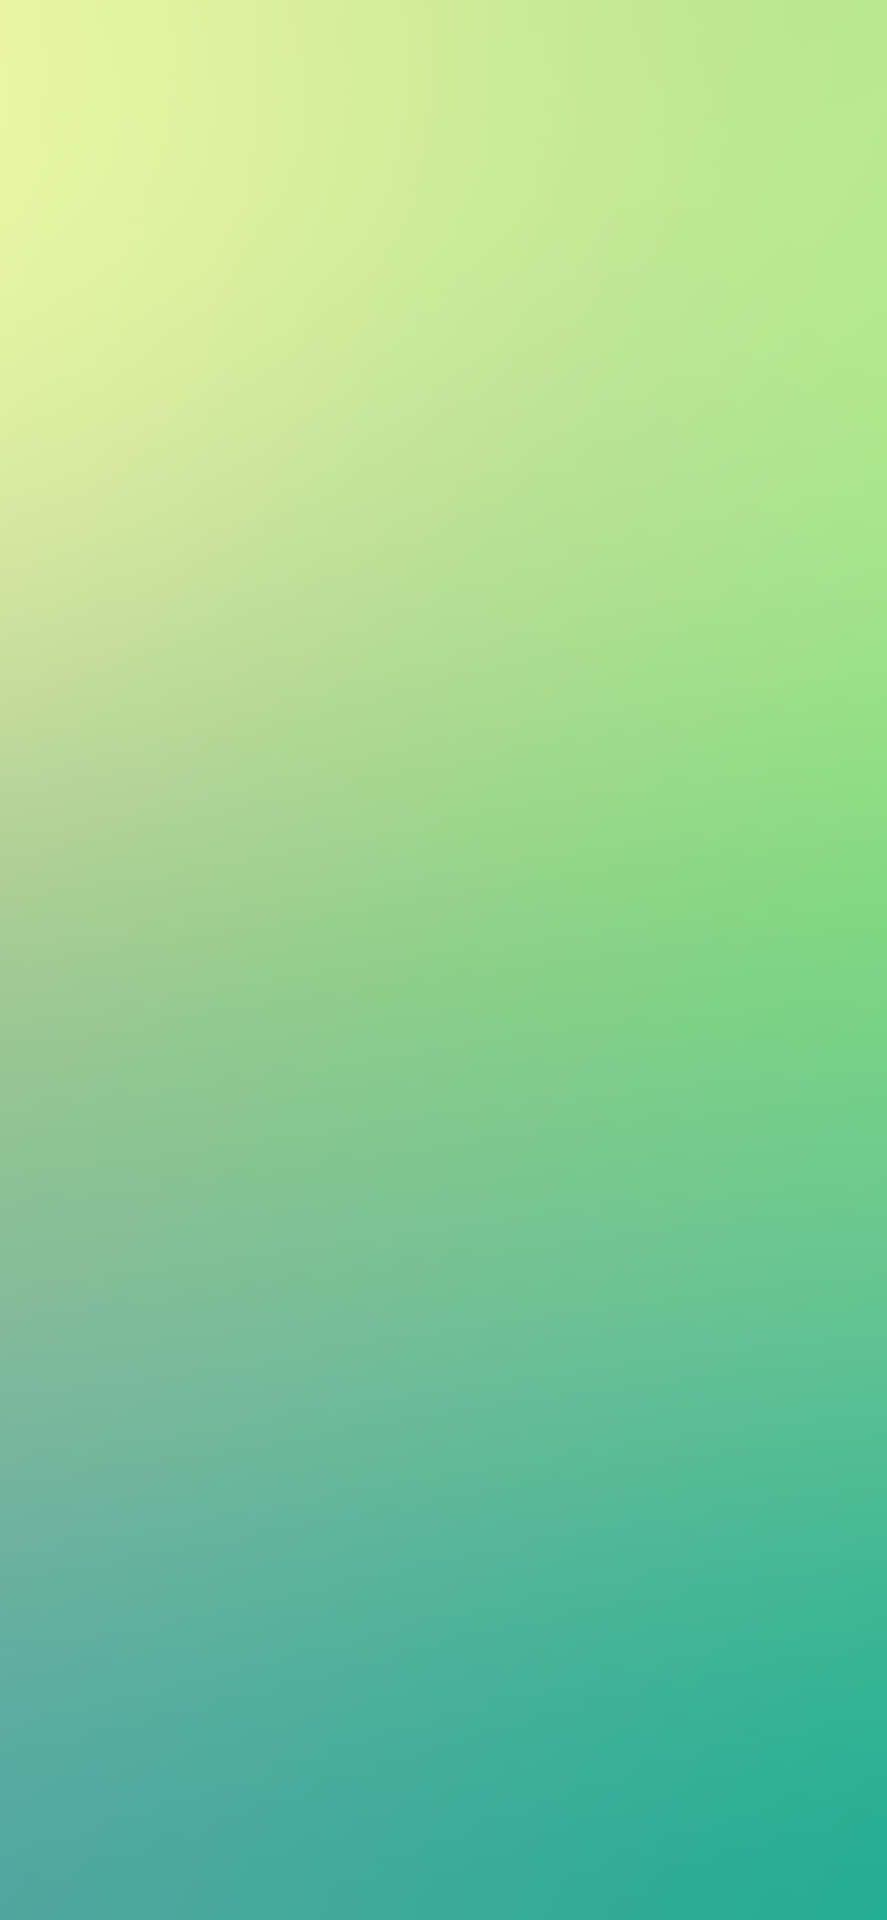 Iphone 11 Yellow Green To Turquoise Wallpaper